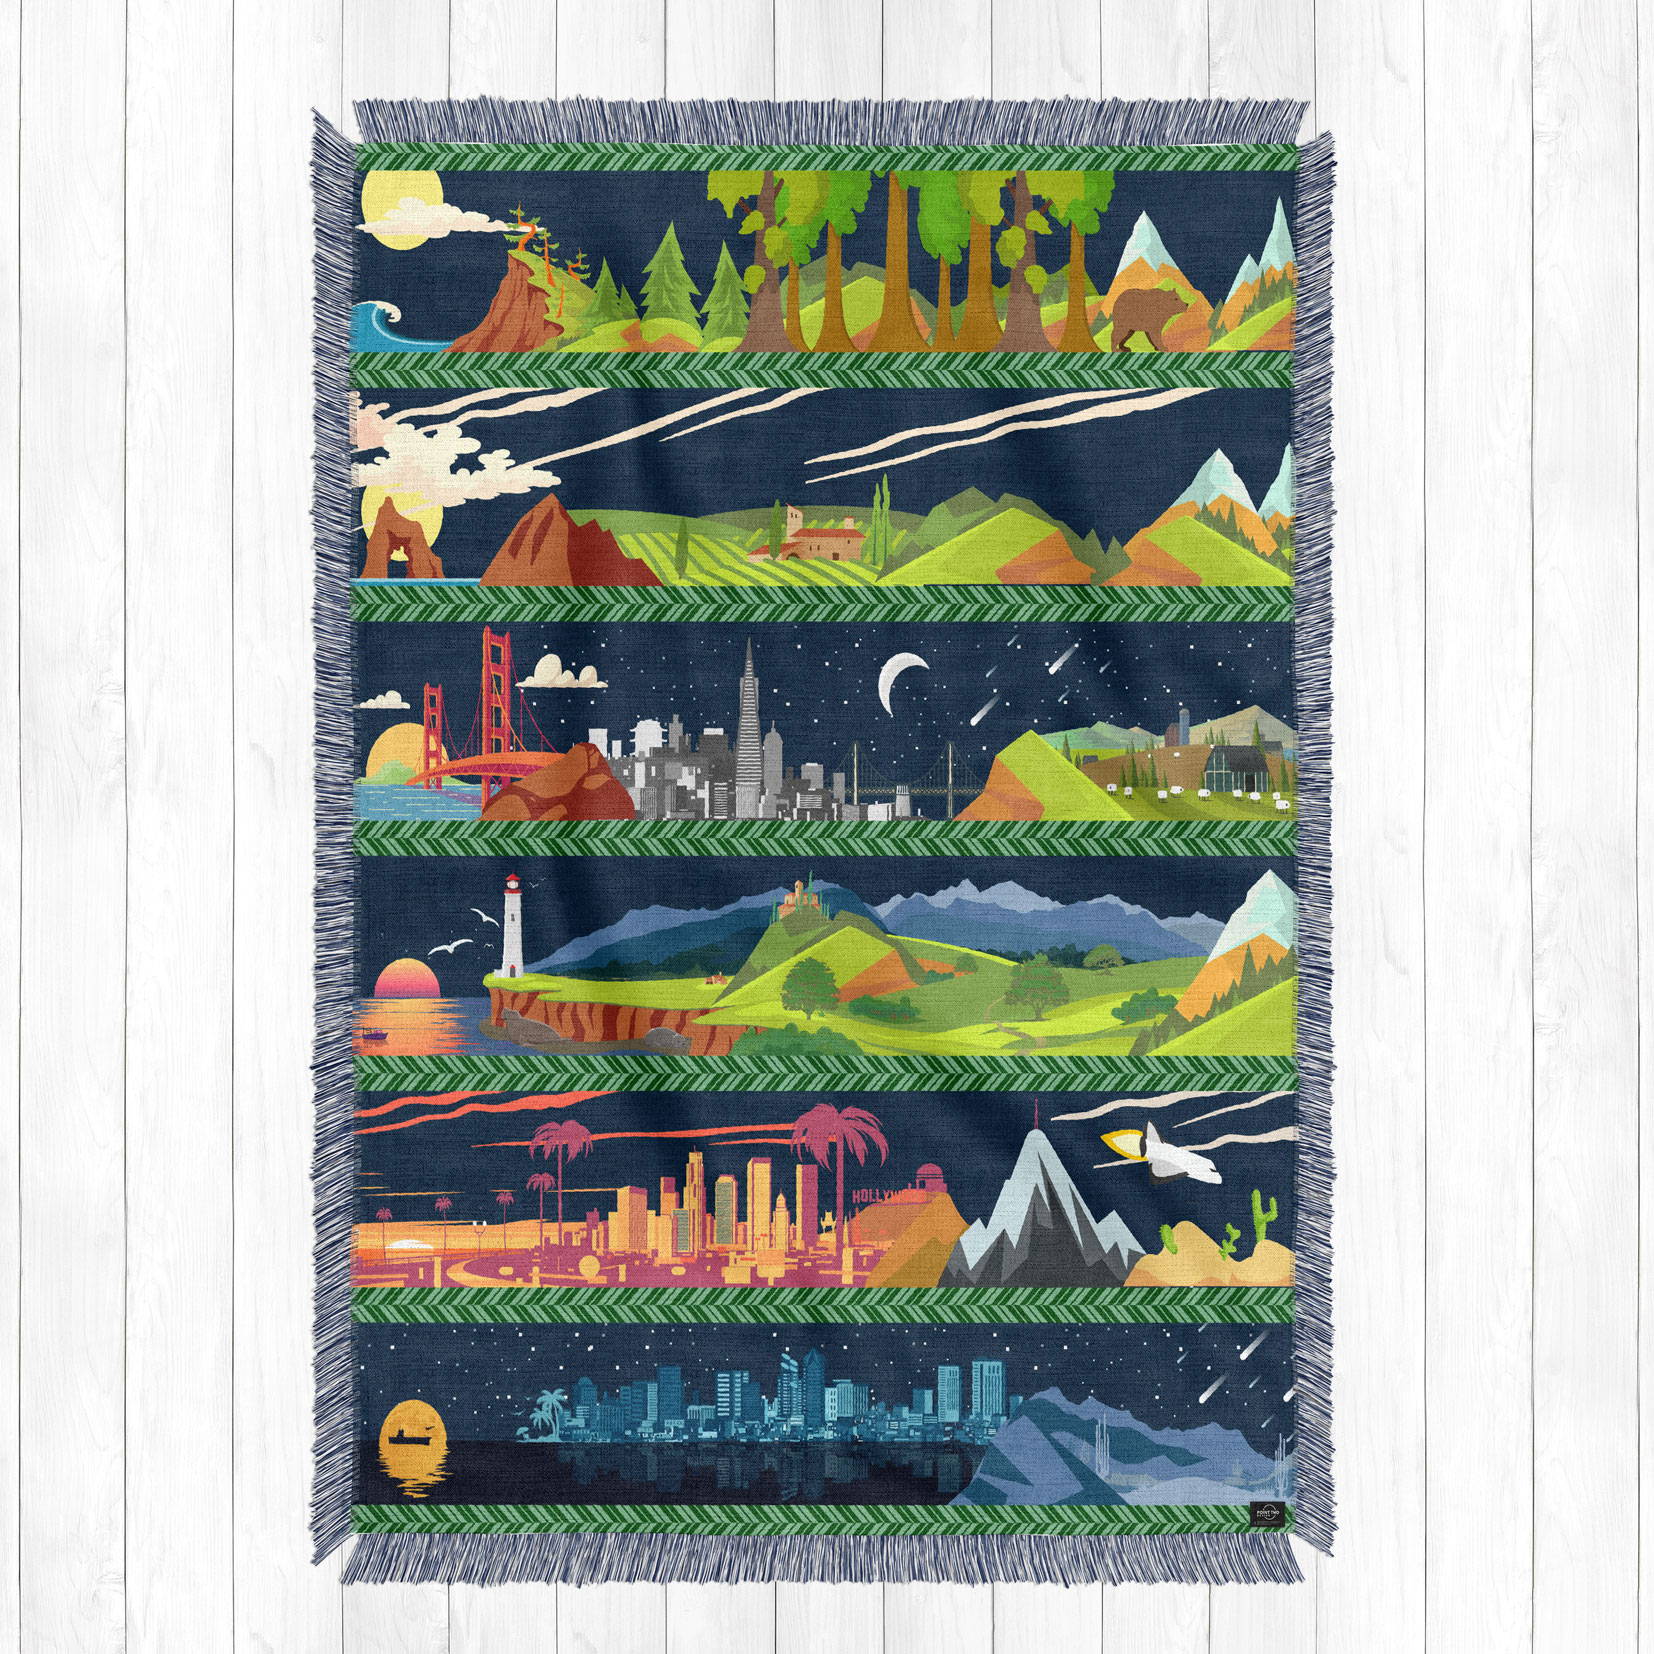 illustrated artwork of california state from north to south as a cotton woven blanket